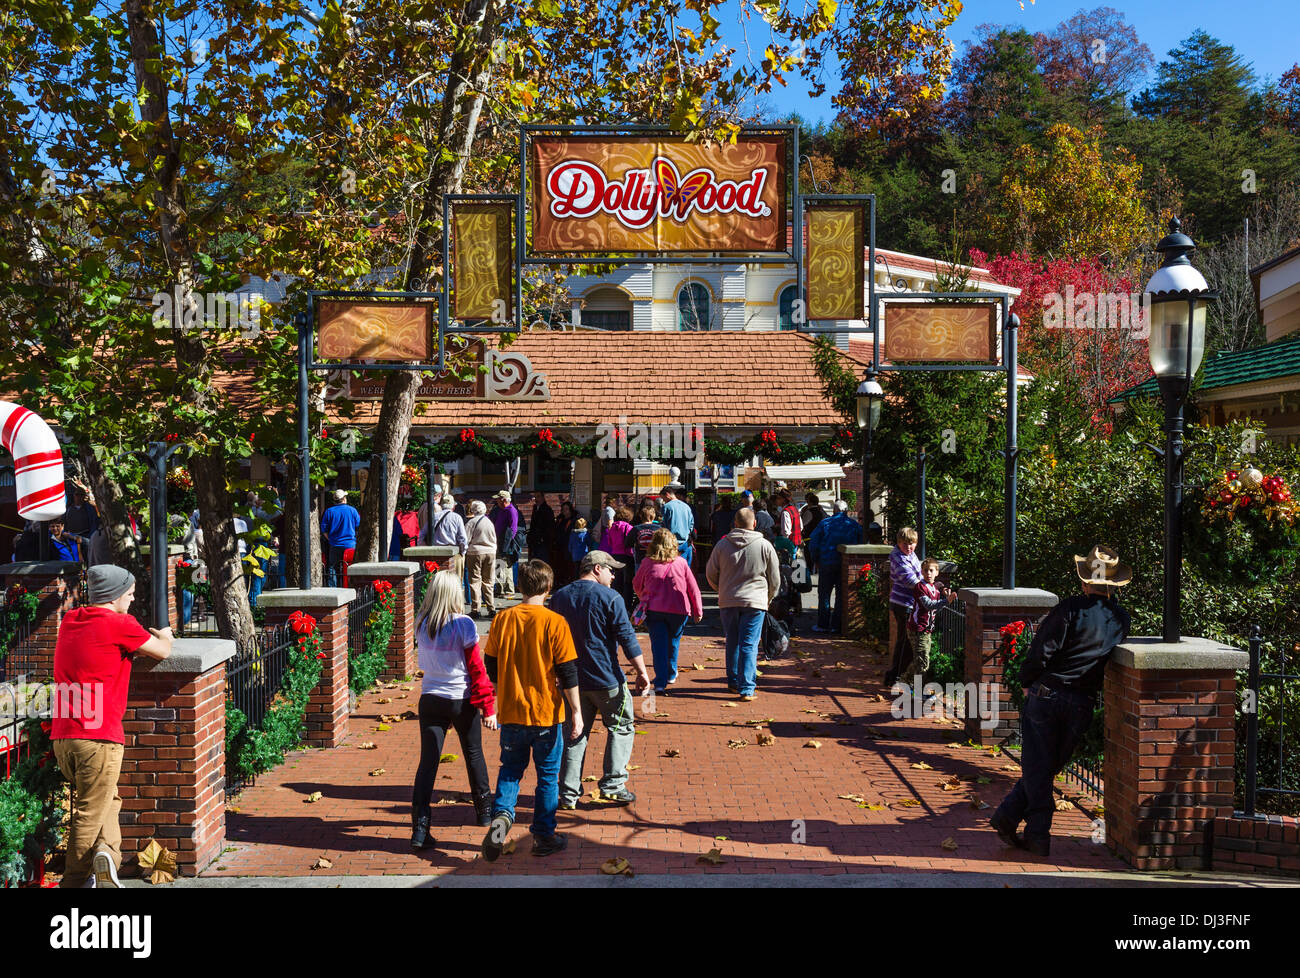 Ingresso a Dollywood theme park, Pigeon Forge, Tennessee, Stati Uniti d'America Foto Stock